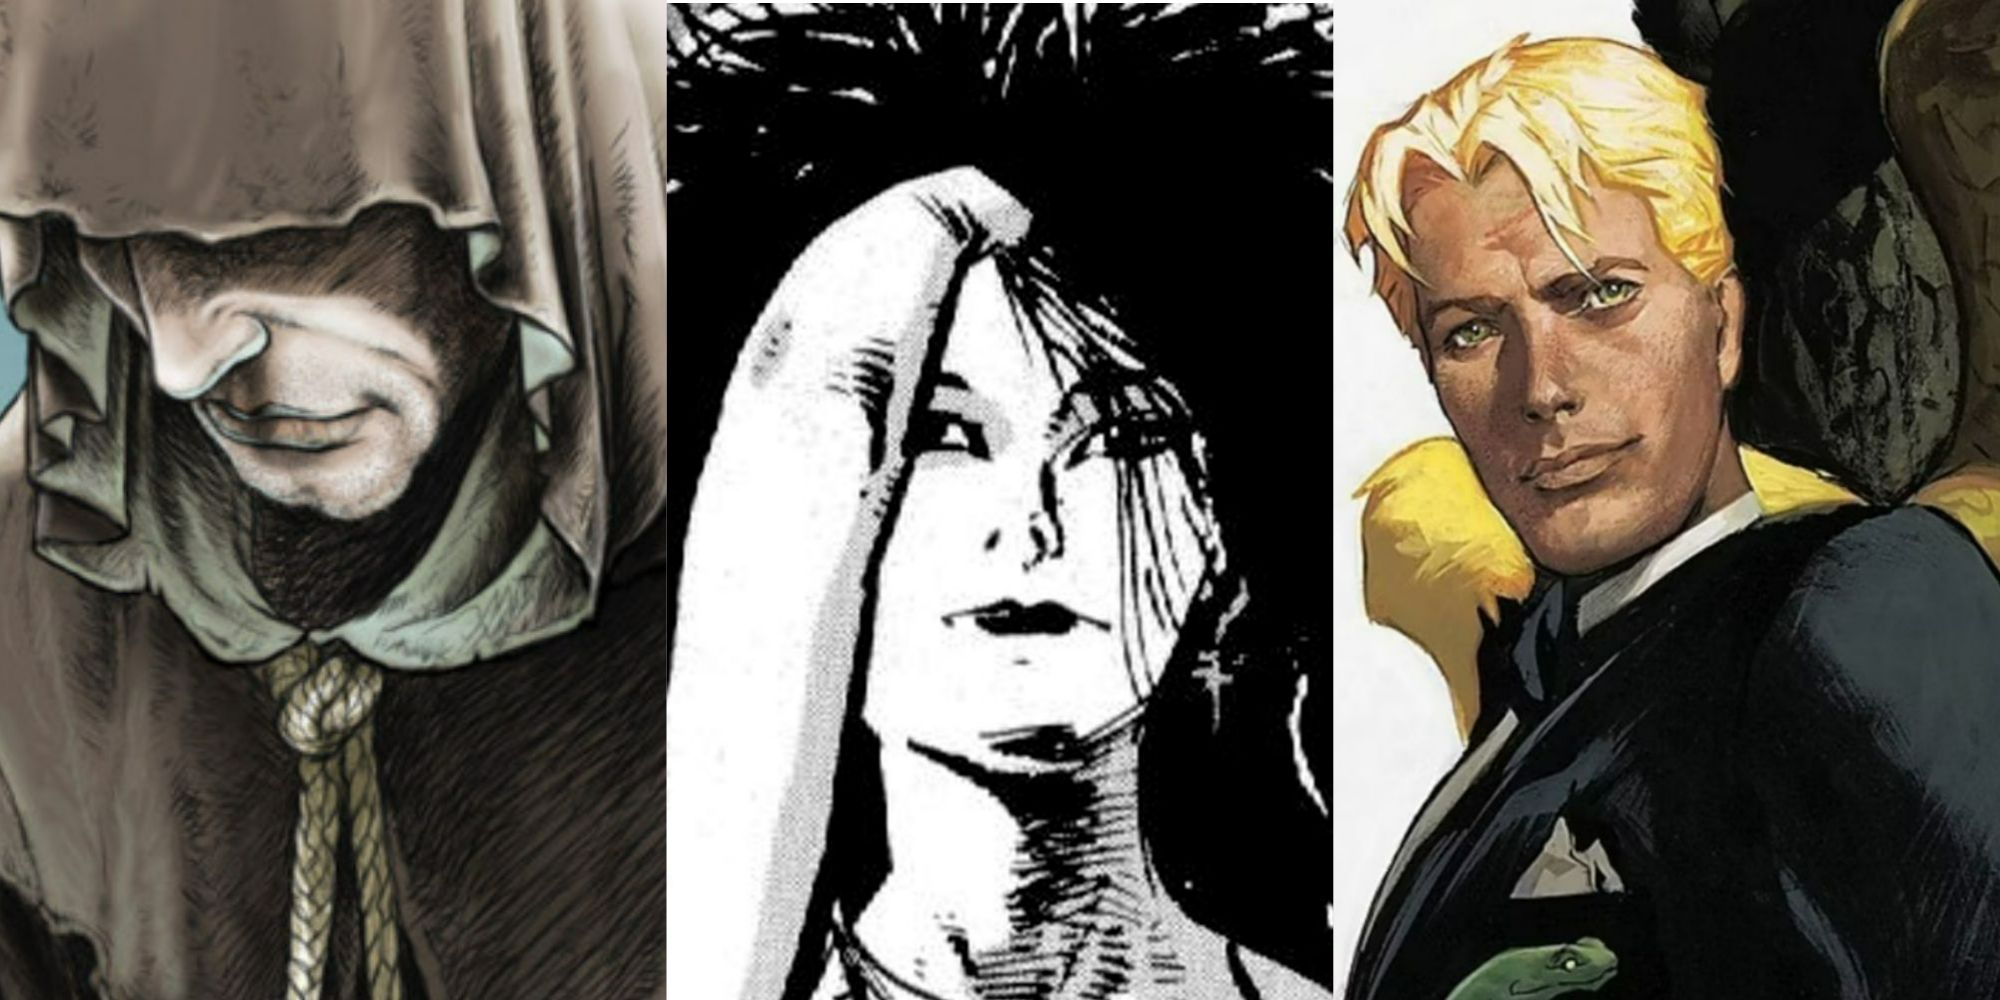 Who is most powerful in Sandman?